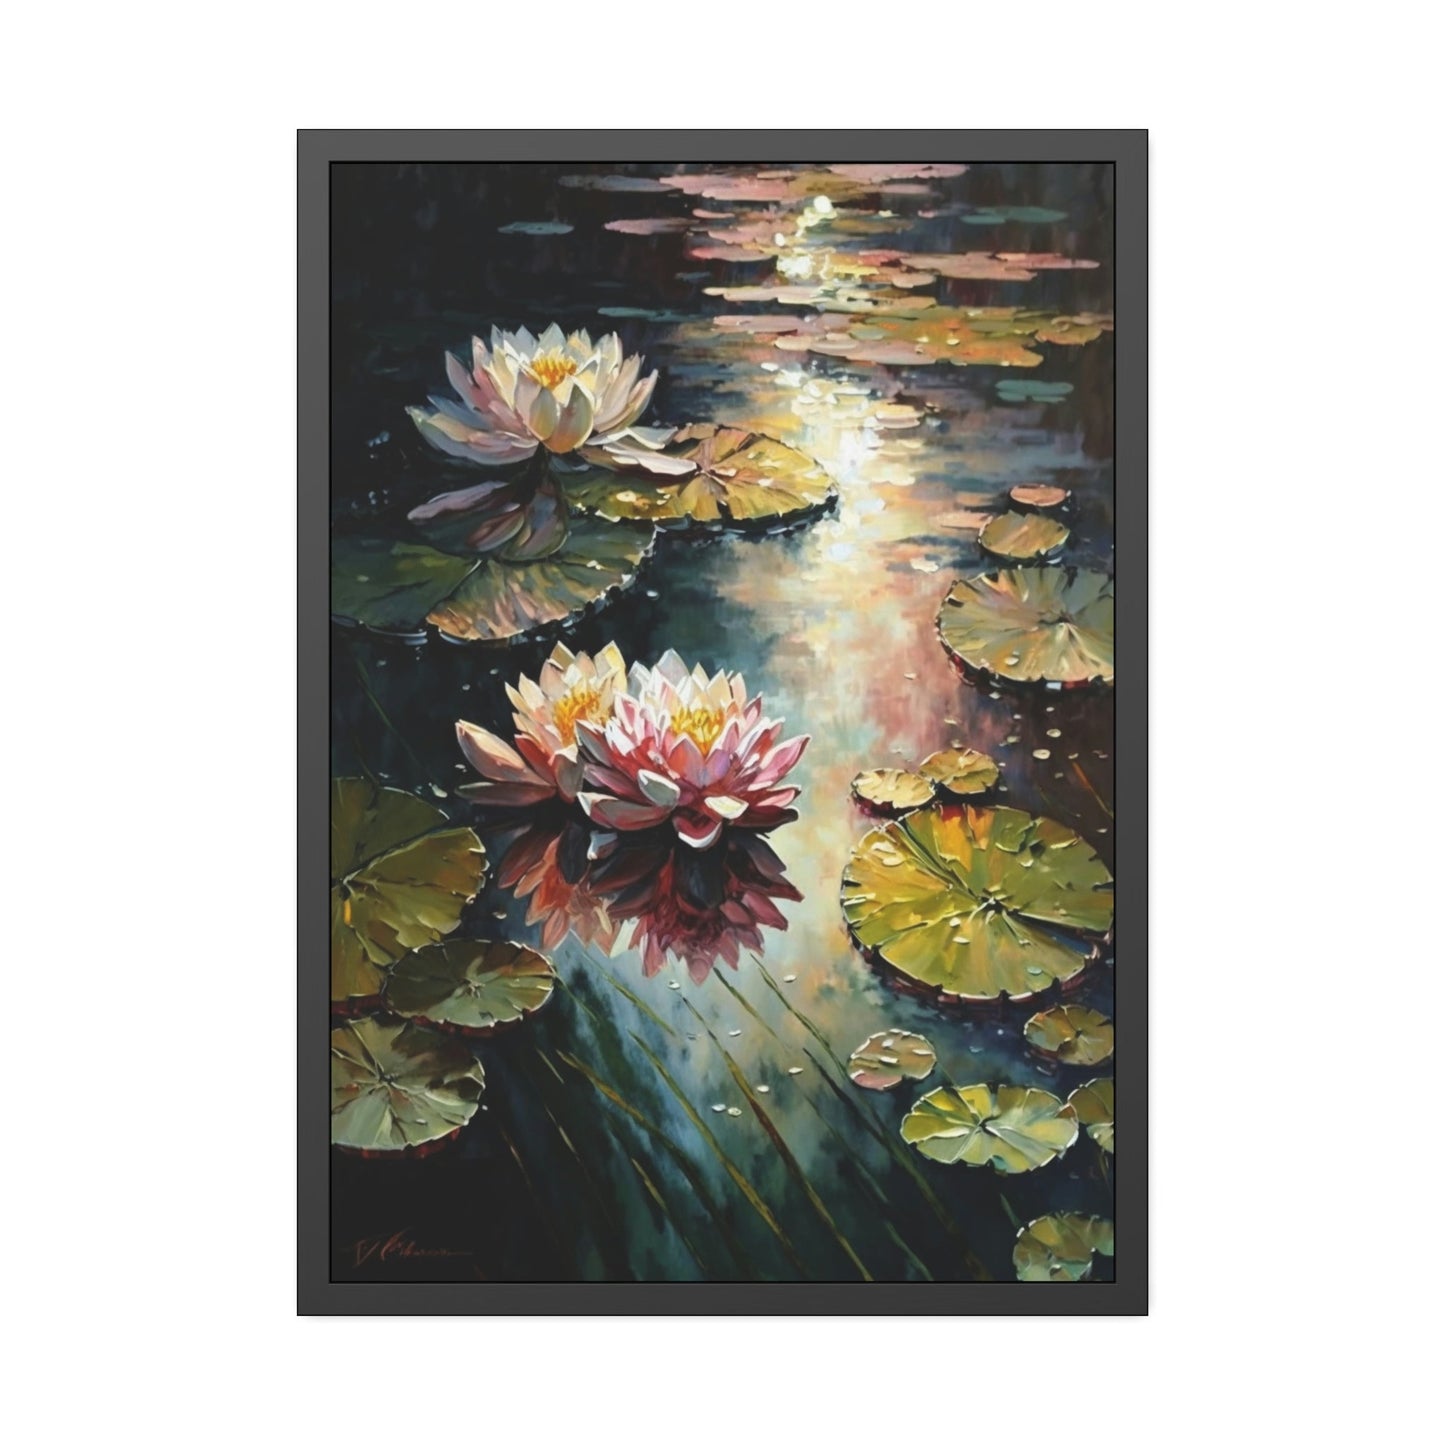 A Symphony of Colors: A Painting of Vibrant Waterlilies